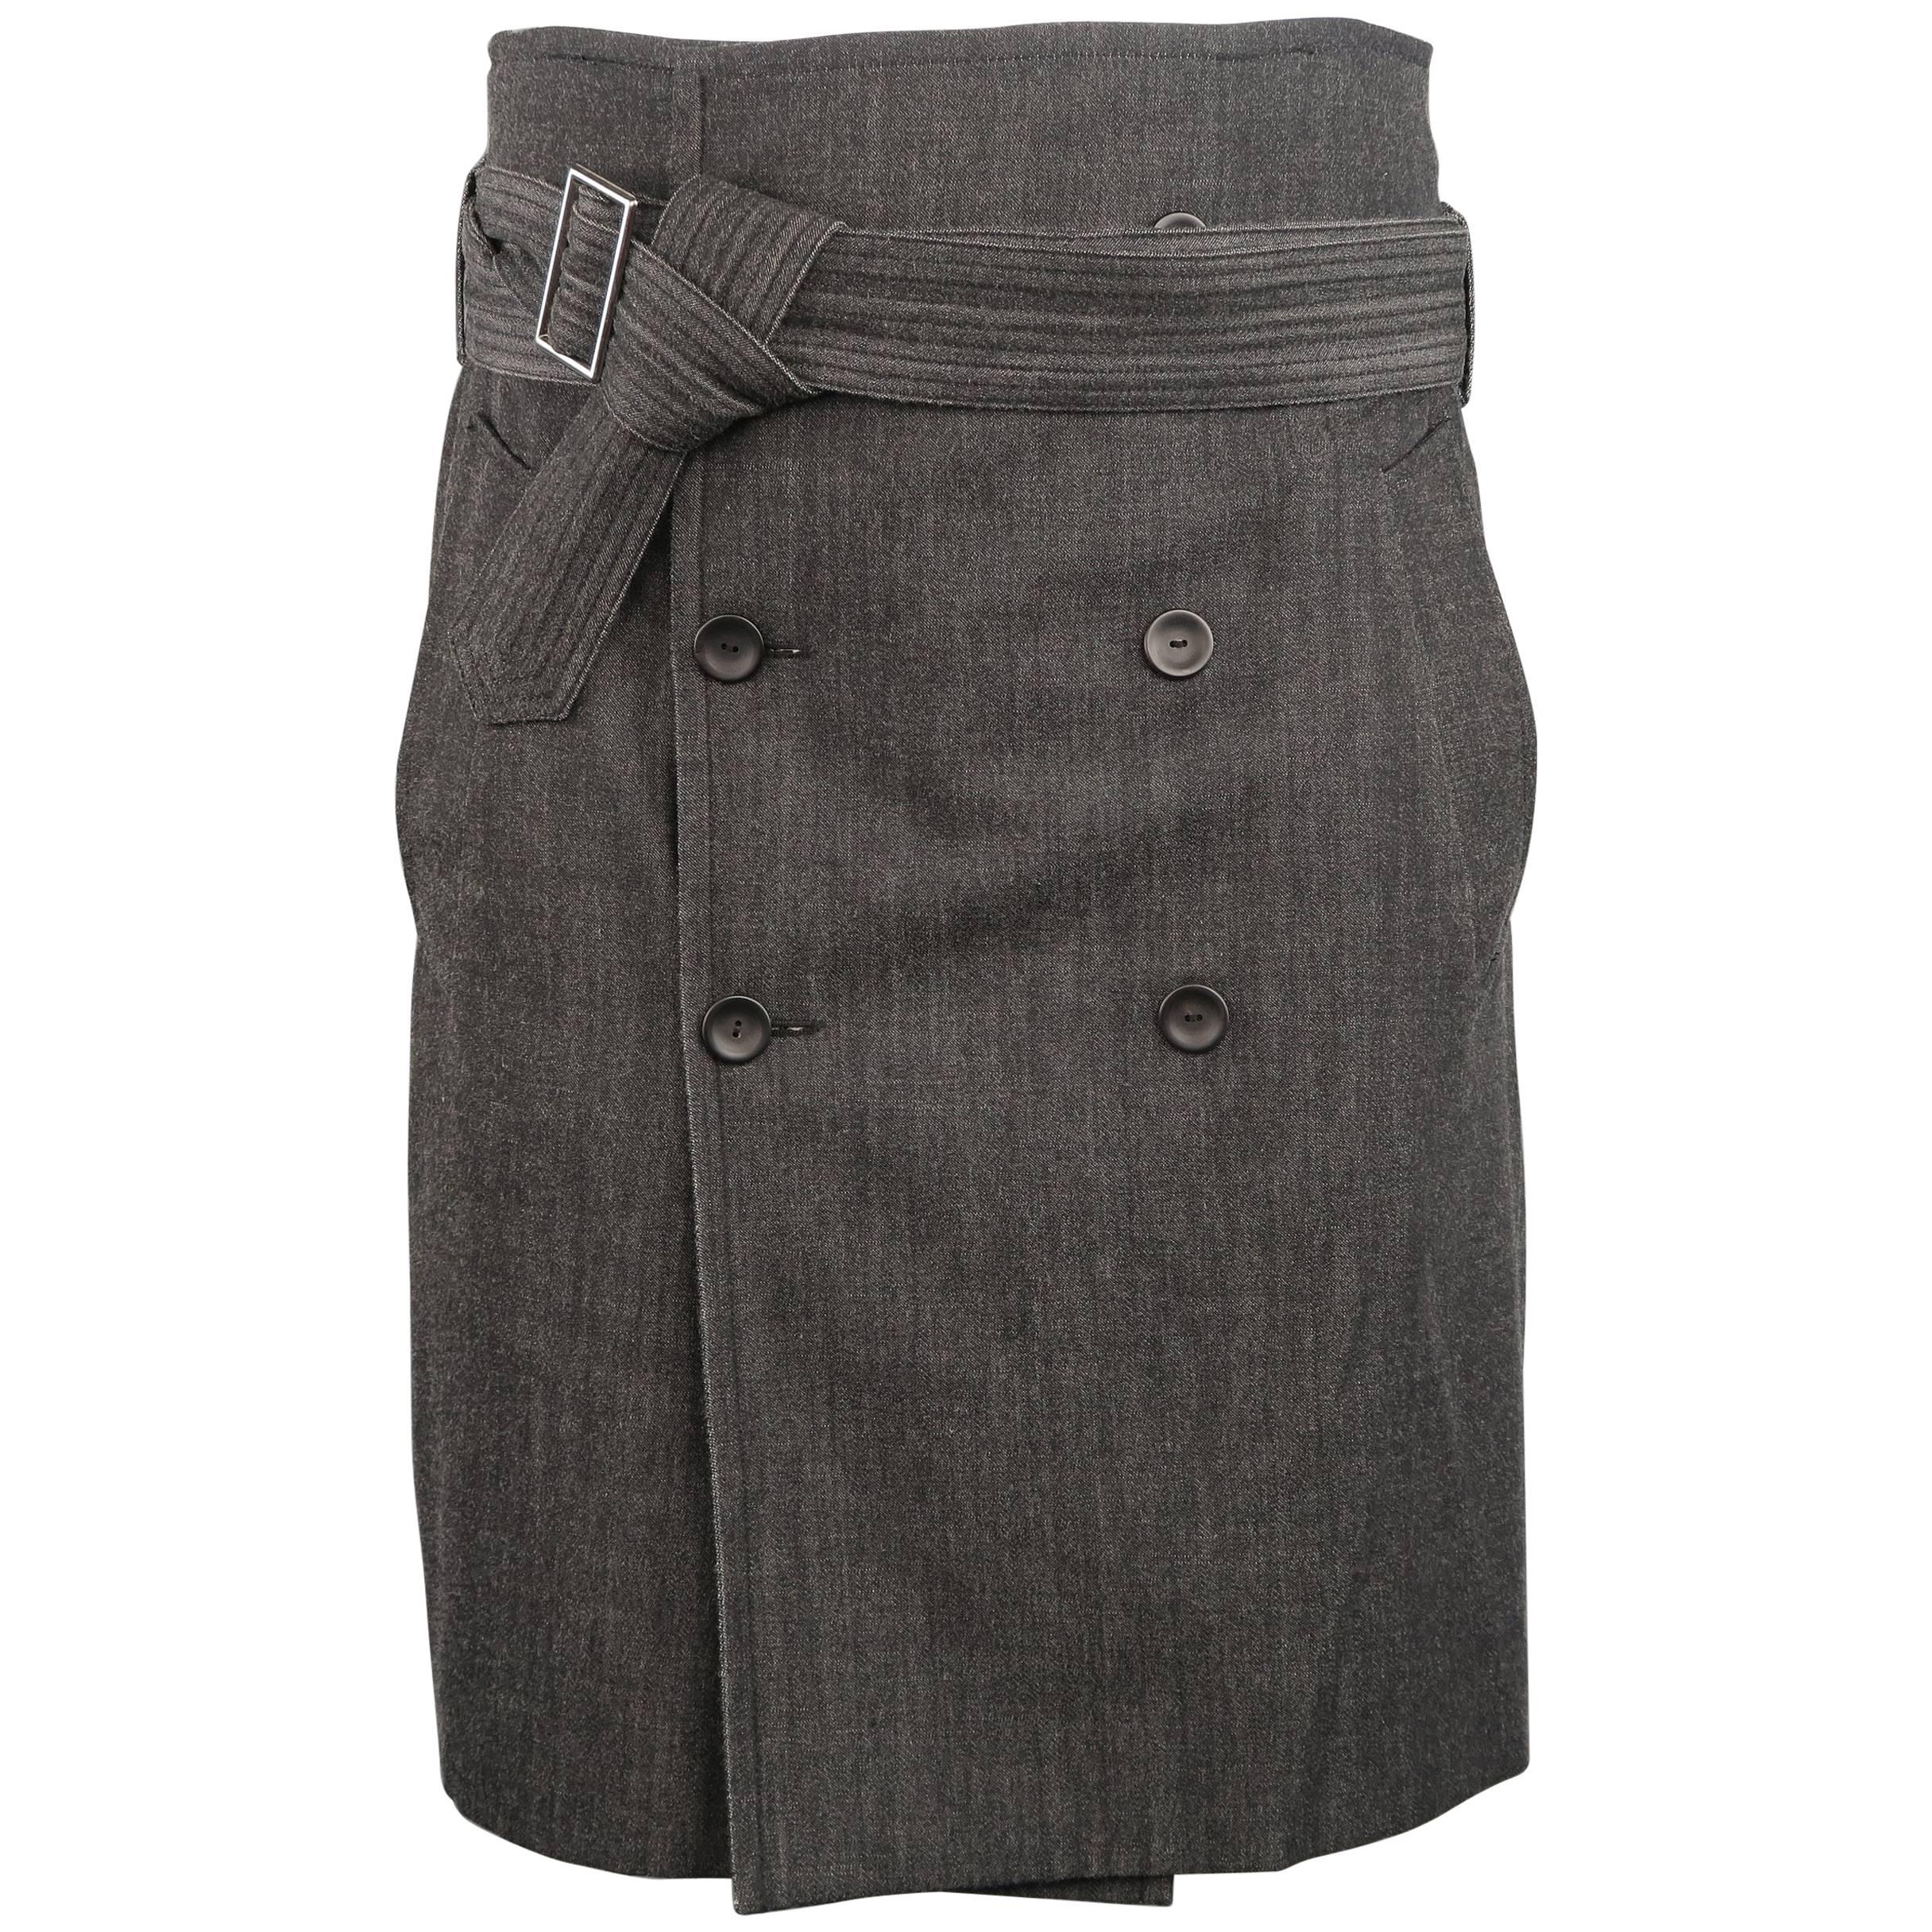 Men's Jean-Paul Gaultier Homme Size 32 Charcoal Rayon Denim Belted Trench Kilt